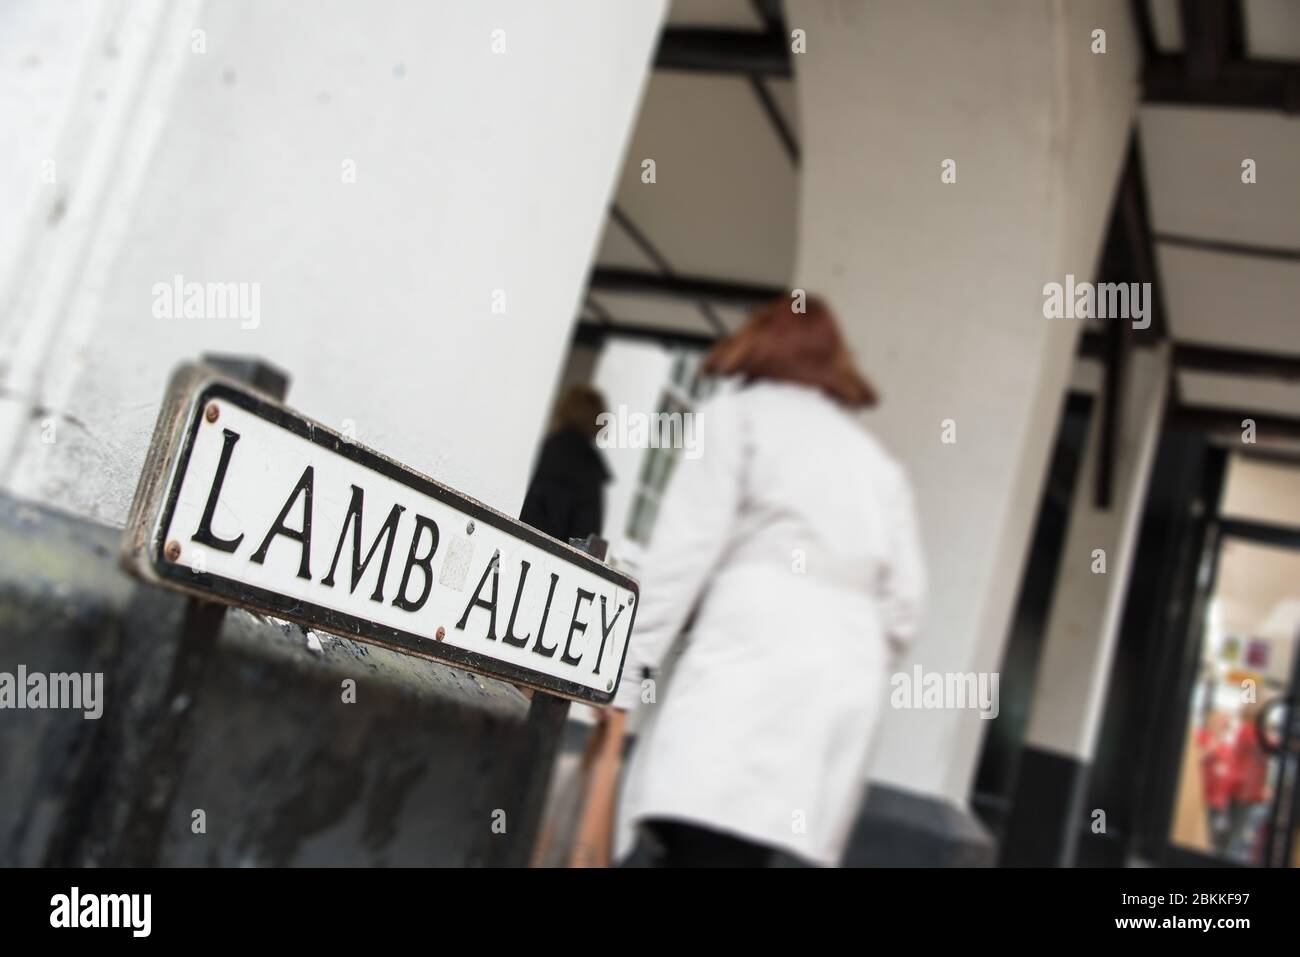 Lamb Alley sign in St Albans Stock Photo